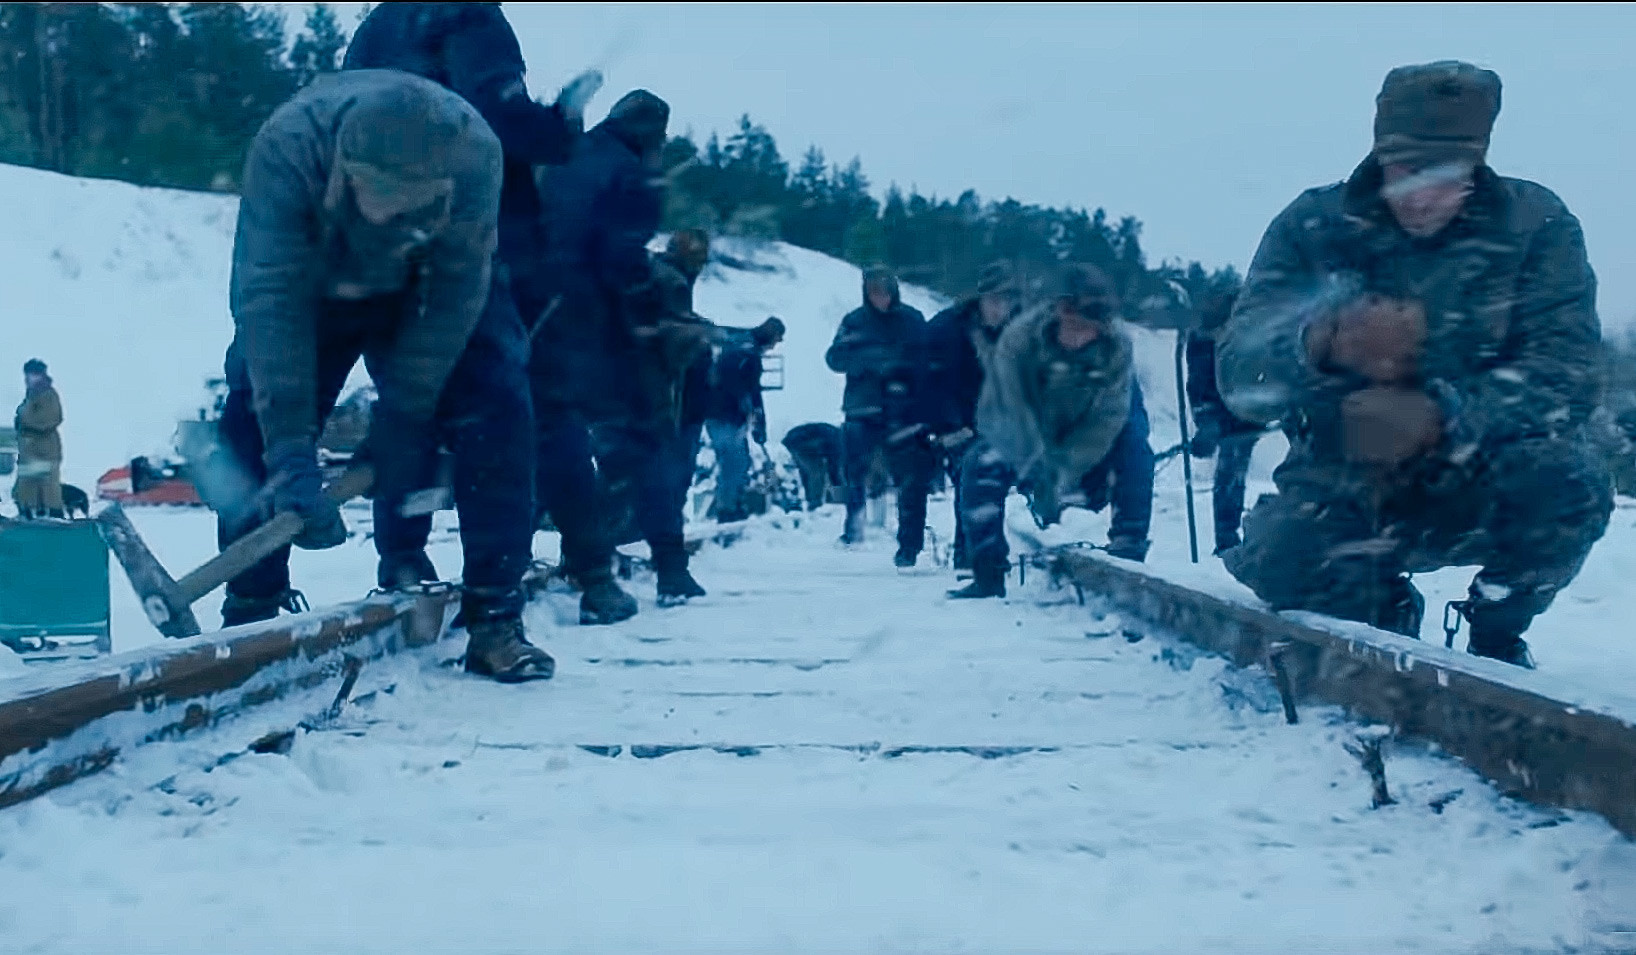 The prisoners definitely are building a railroad, presumably BAM, in official S04 teaser